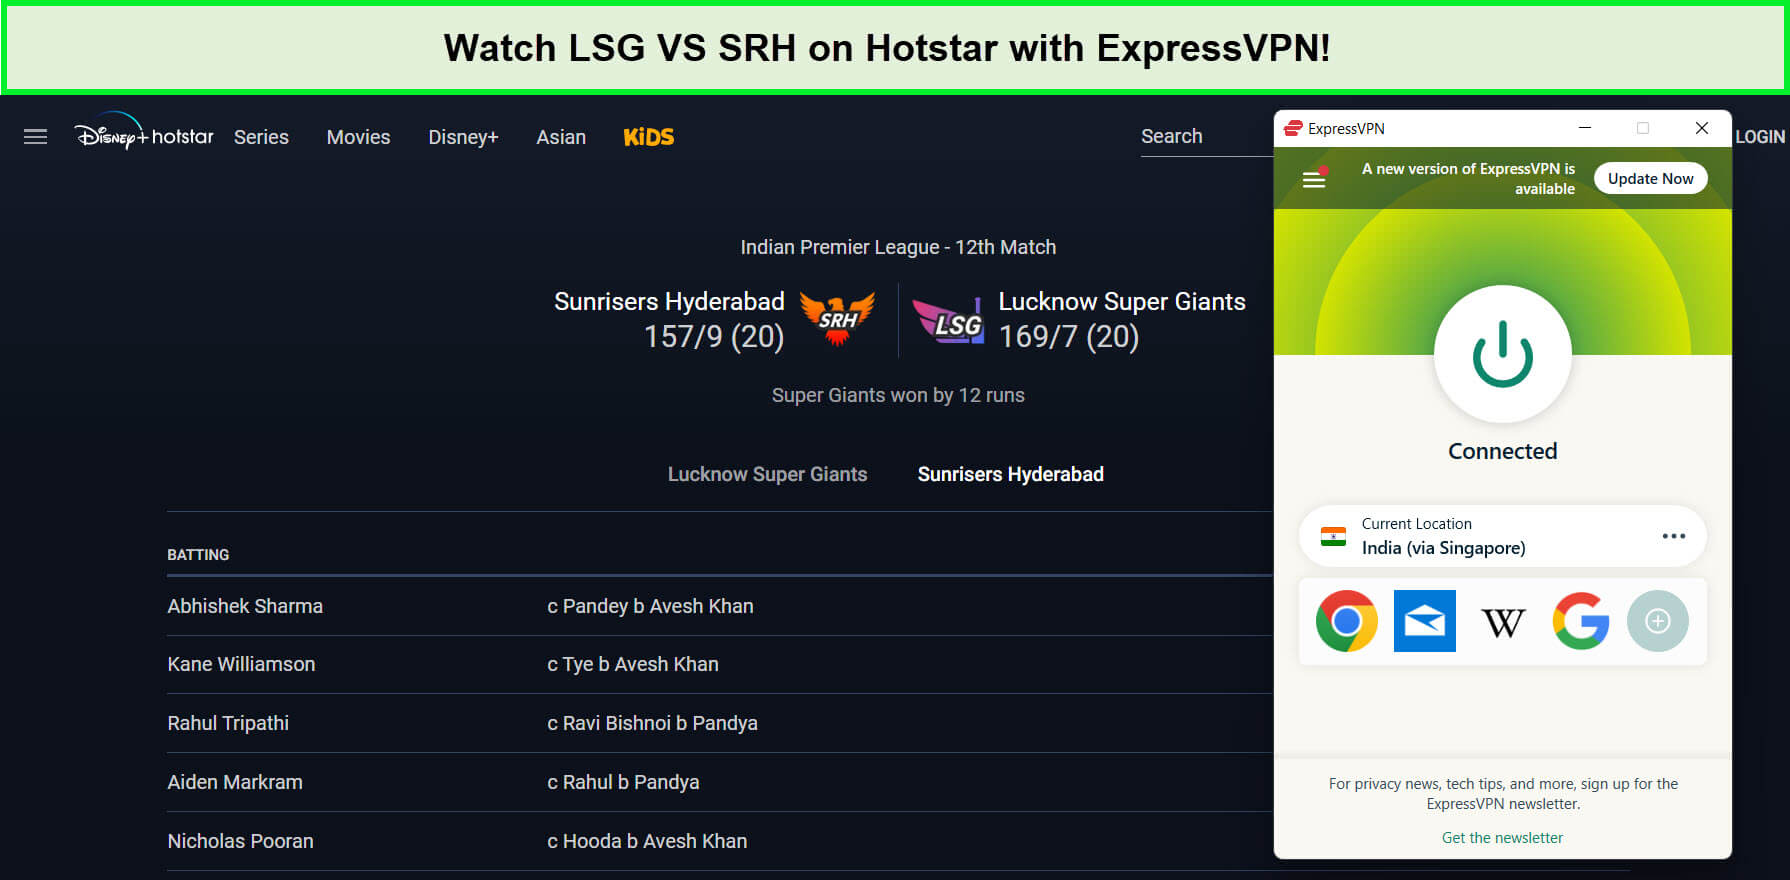 watch-lucknow-super-giants-vs-sunirisers-hyderabad-in-Singapore-on-hotstar-with-expressvpn